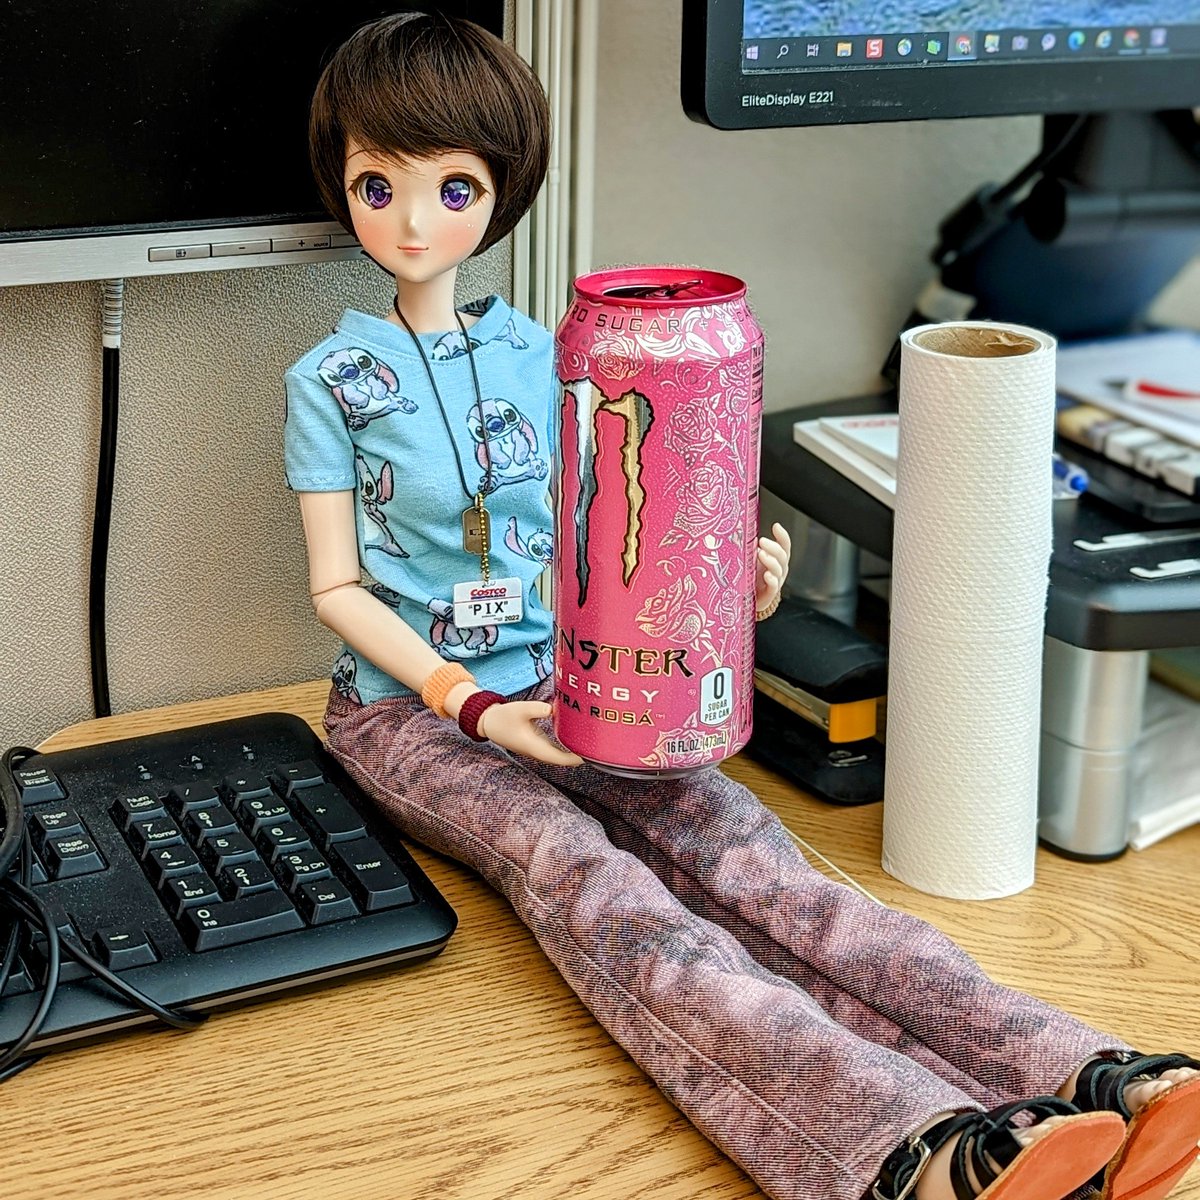 'Hey, Pix, spare me some!' (fortunately my employer Costco sells this by the case!)😅#Pix #SmartDoll #BJD #desk #actionfigure #Monster #Costco #energydrink #geekGirl #madskills #hightech #office #work #Stitch #cubicle #badge #cubelife #corporate #cubefarm #longday #energize #TGIF